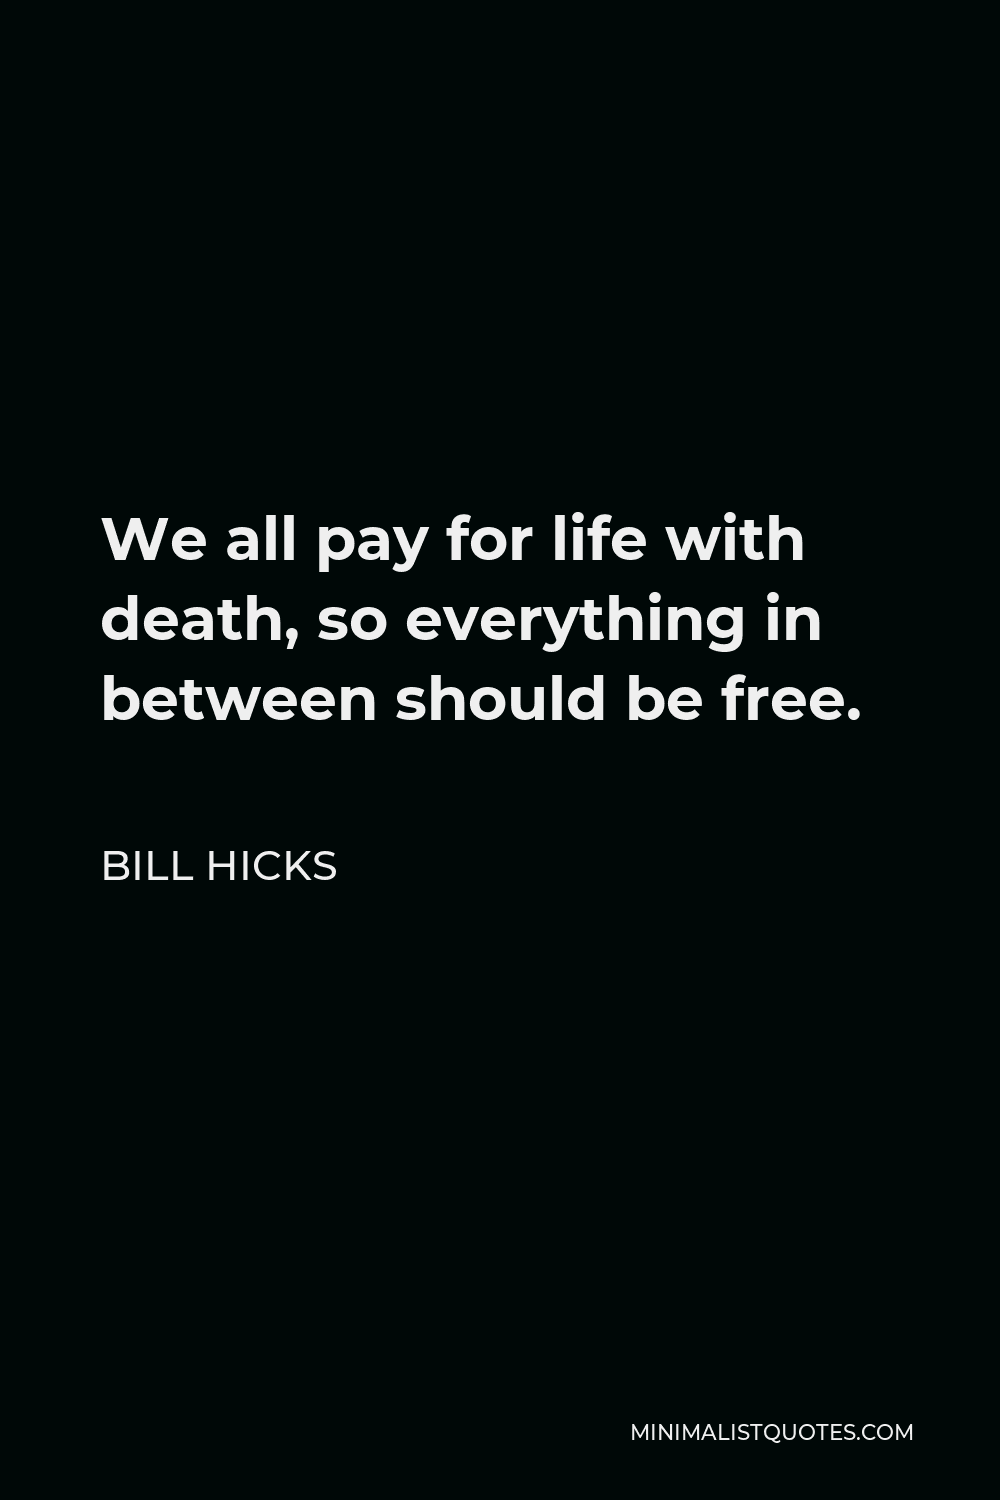 Bill Hicks Quote - We all pay for life with death, so everything in between should be free.